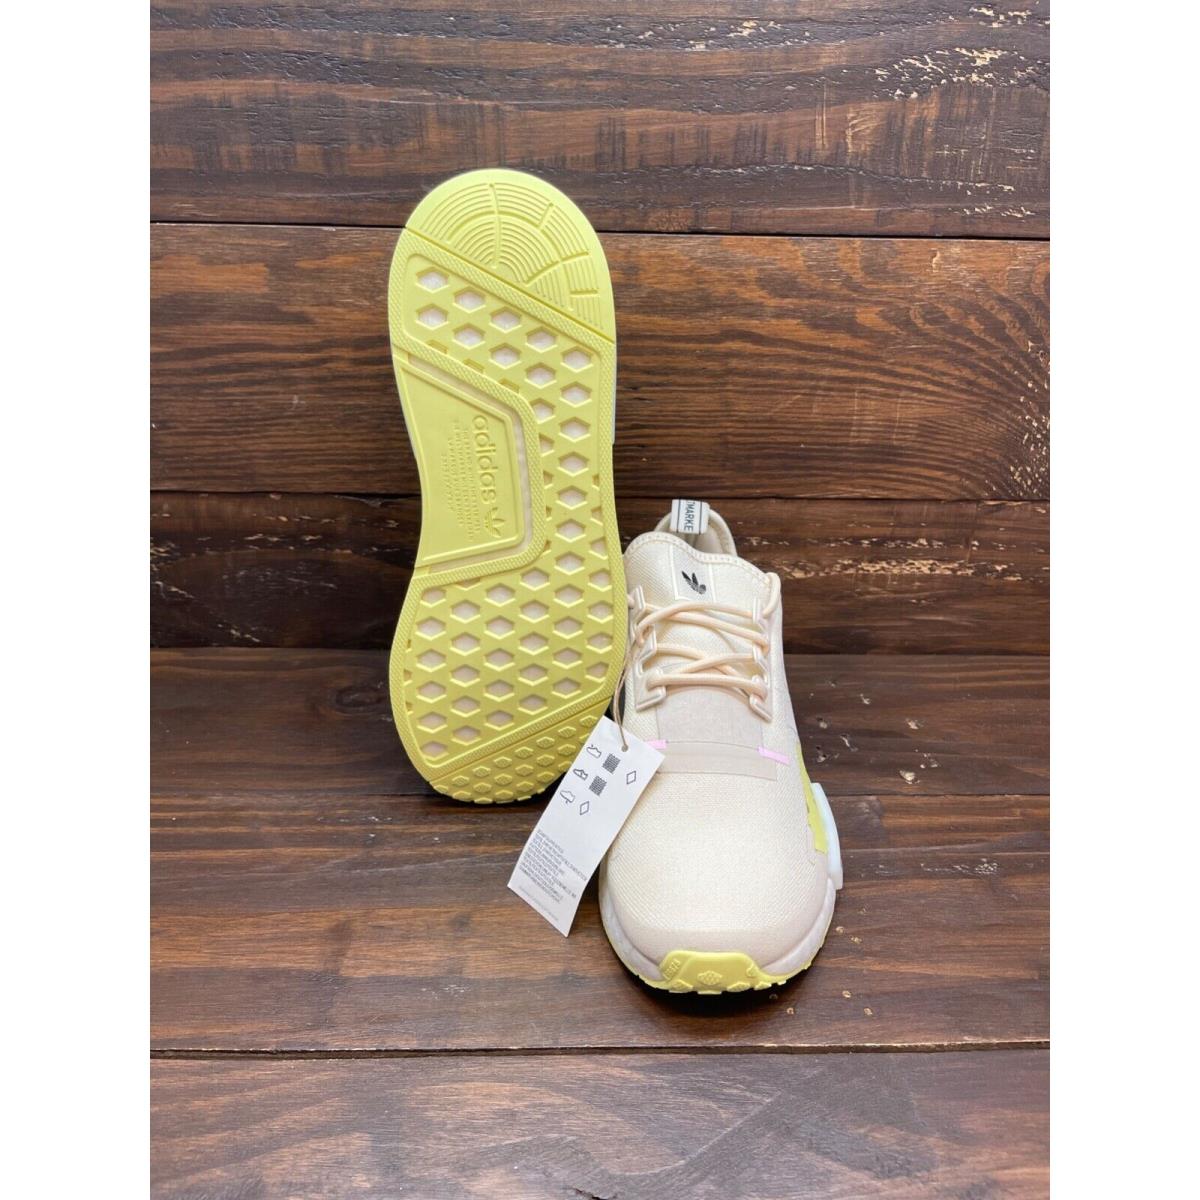 Adidas shoes  - Yellow 3